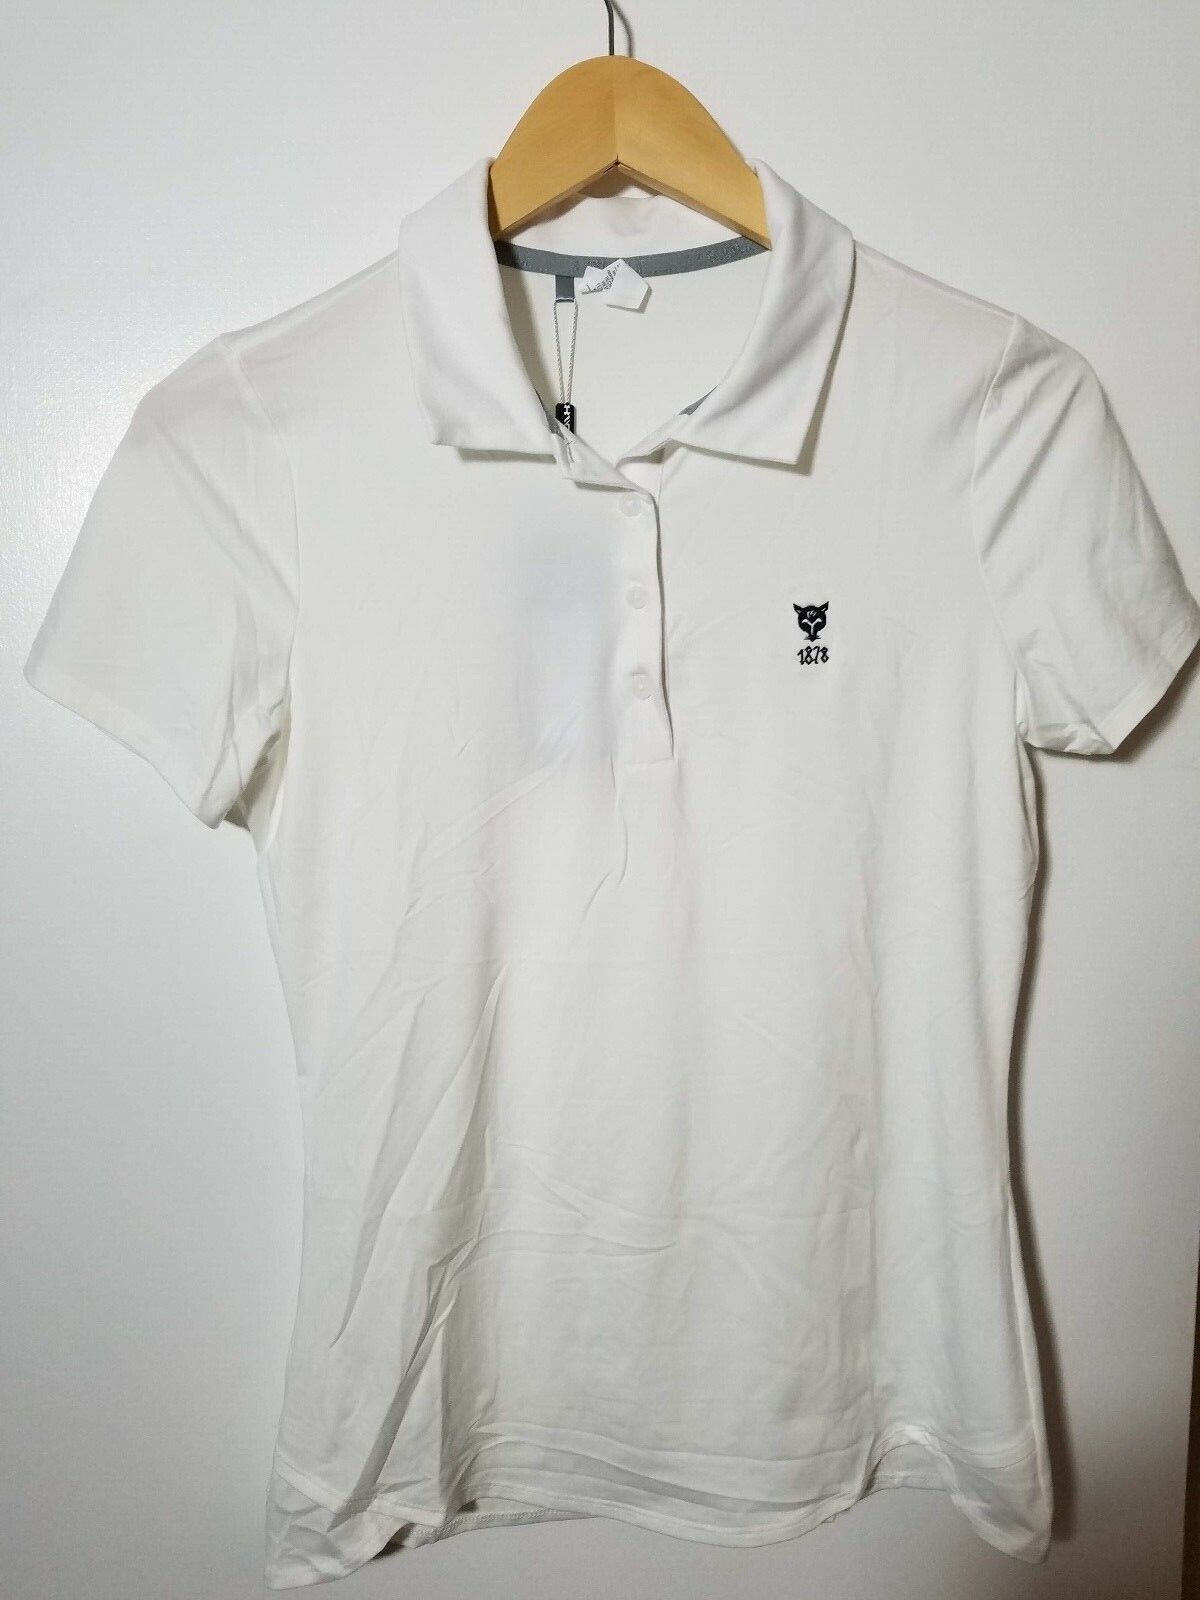 1 NWT UNDER ARMOUR WOMEN\'S POLO, SIZE: SMALL, COLOR: WHITE (J81)